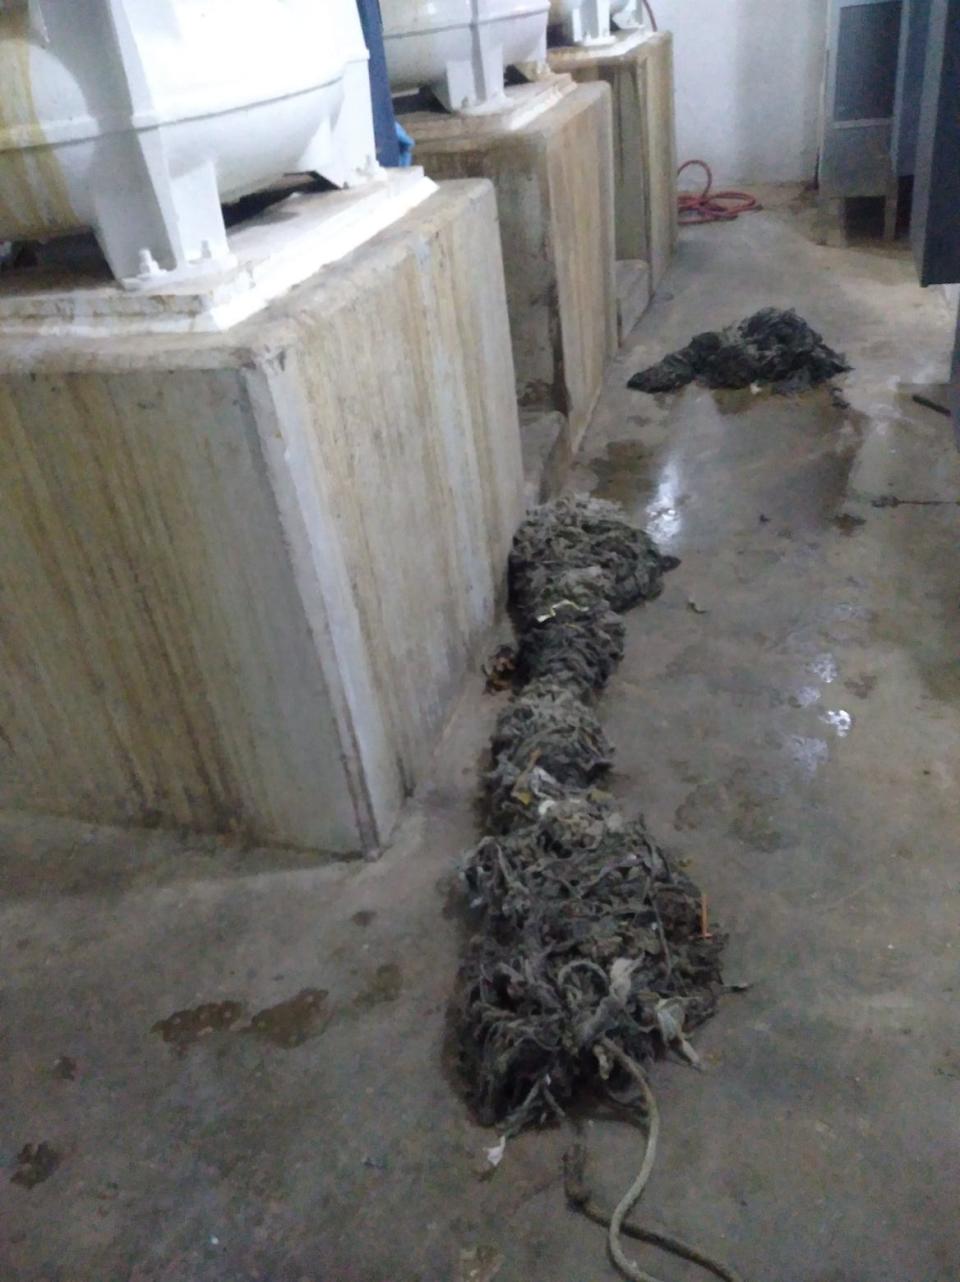 This 10 foot long clog was found in New Bern's sewer system in February by wastewater treatment crews. The large clump is combination of paper products and grease.